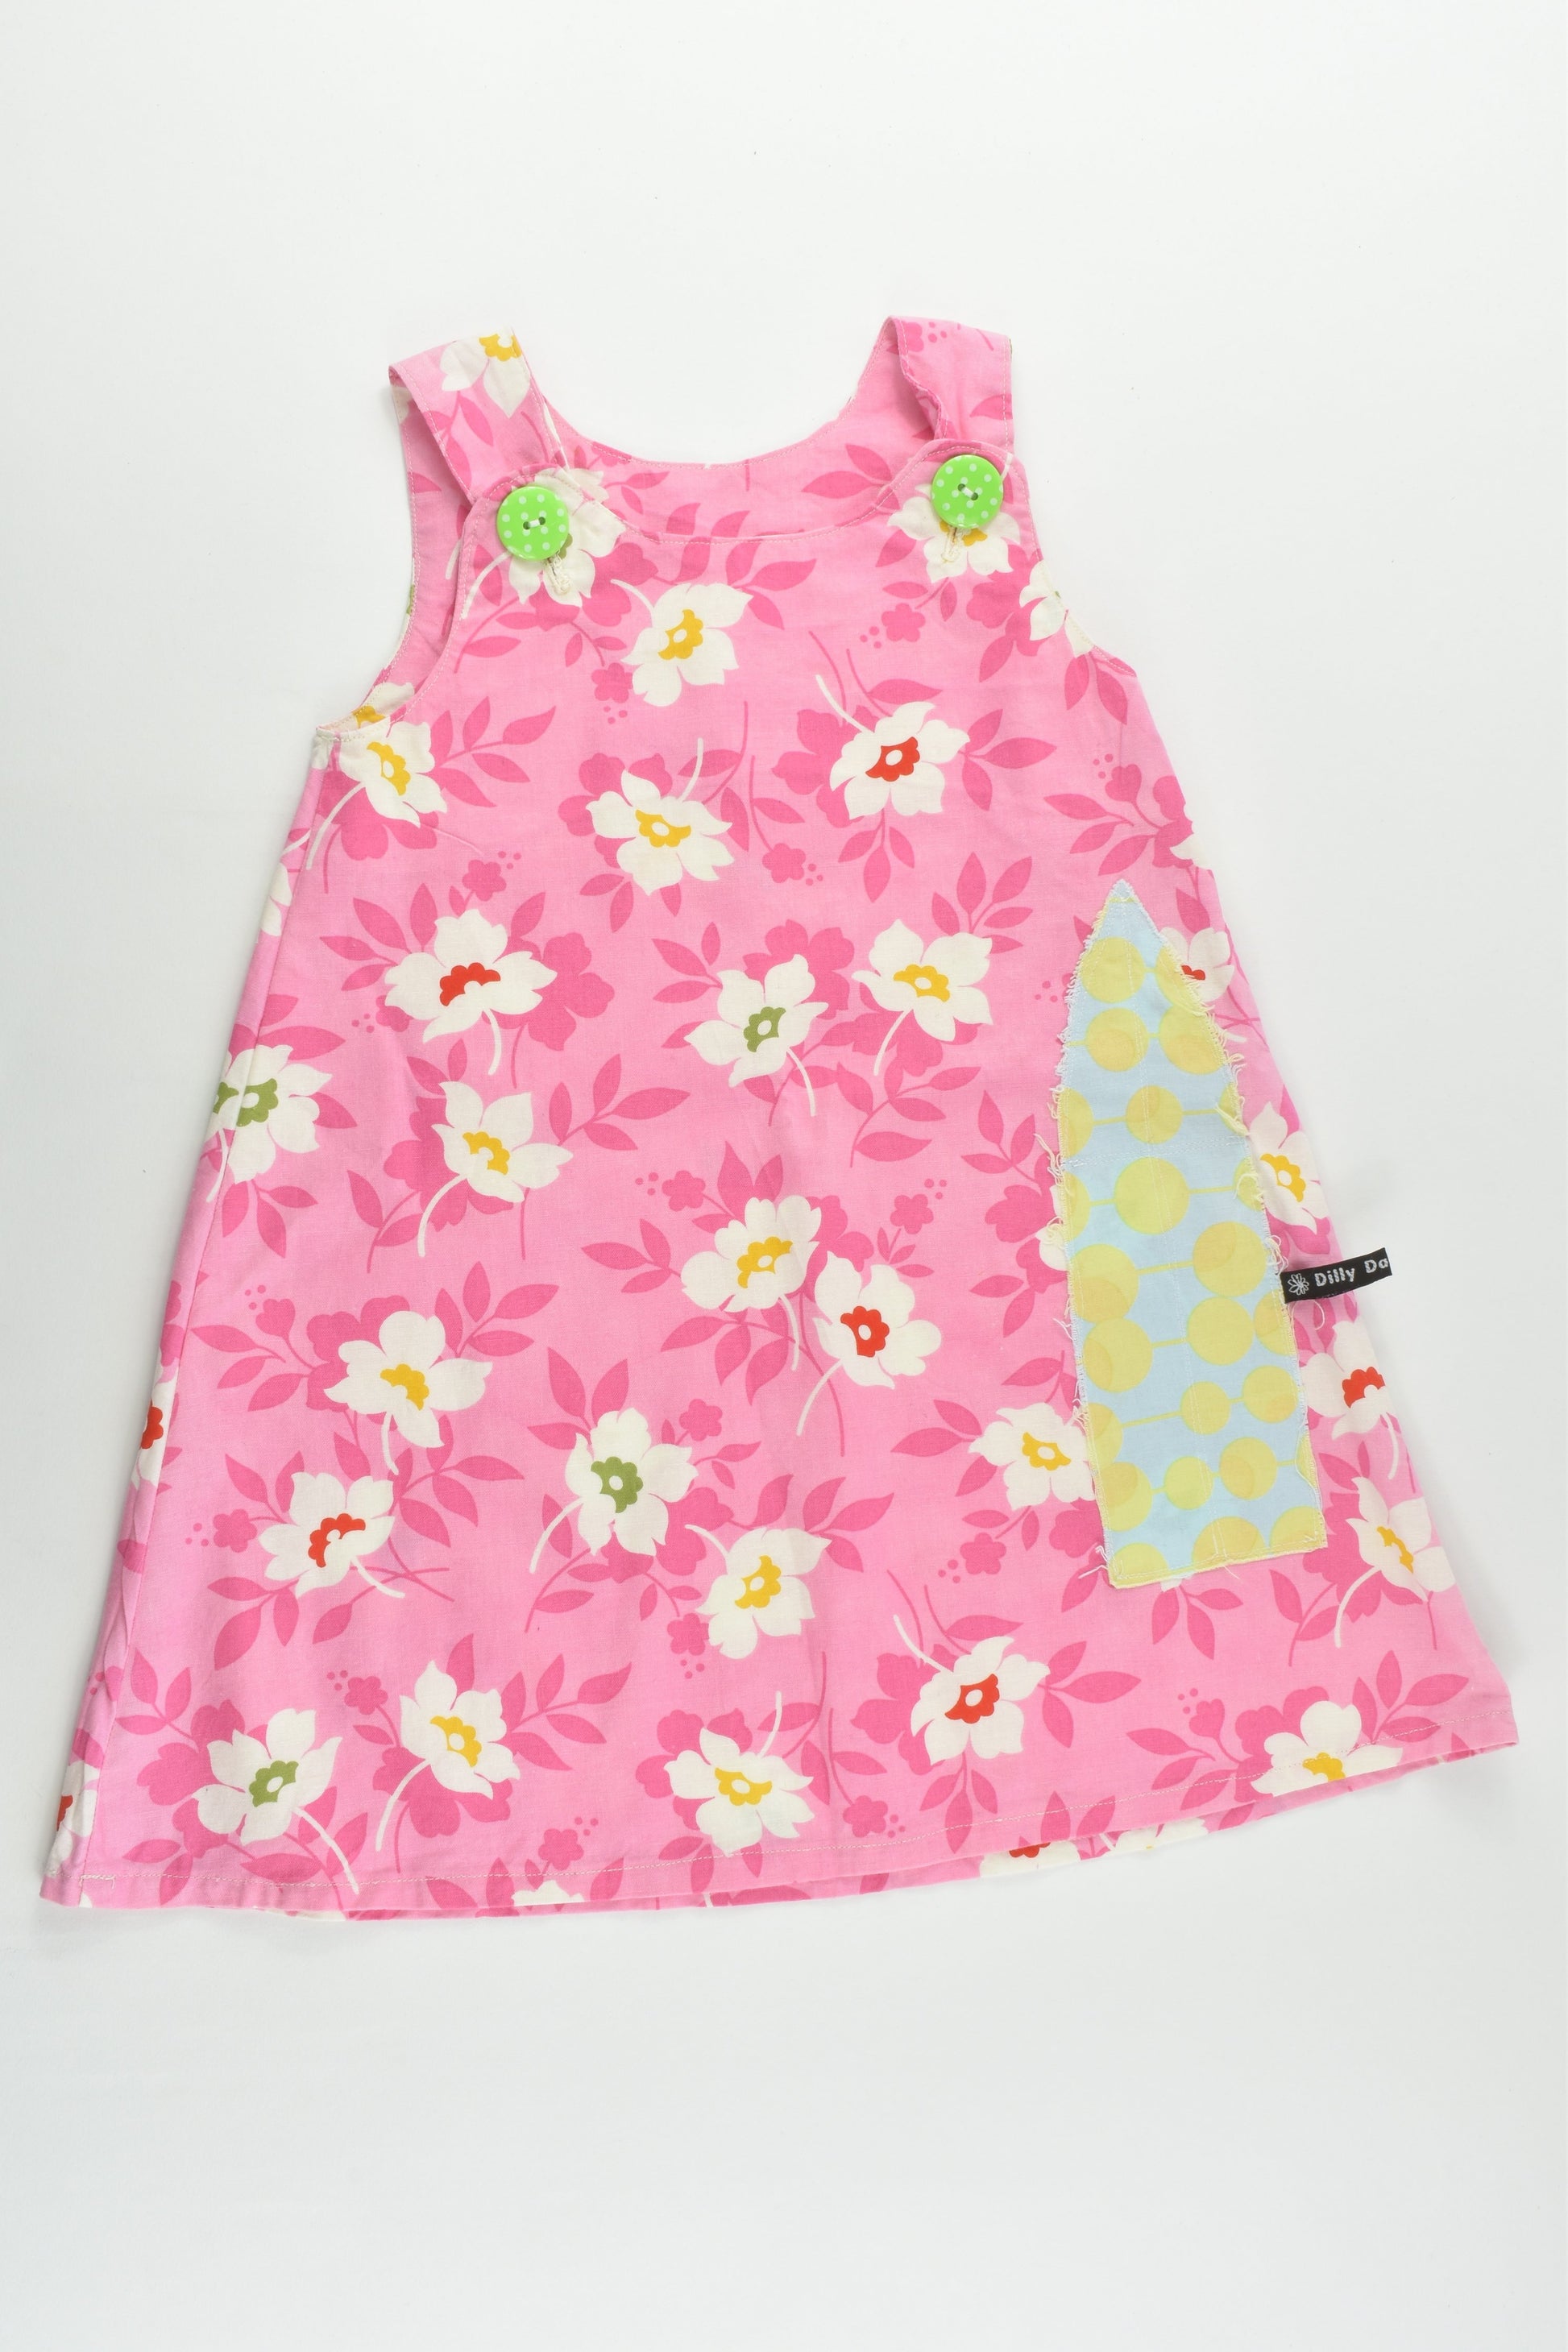 Dilly Dally Designs Size approx 2-3 Handmade Dress